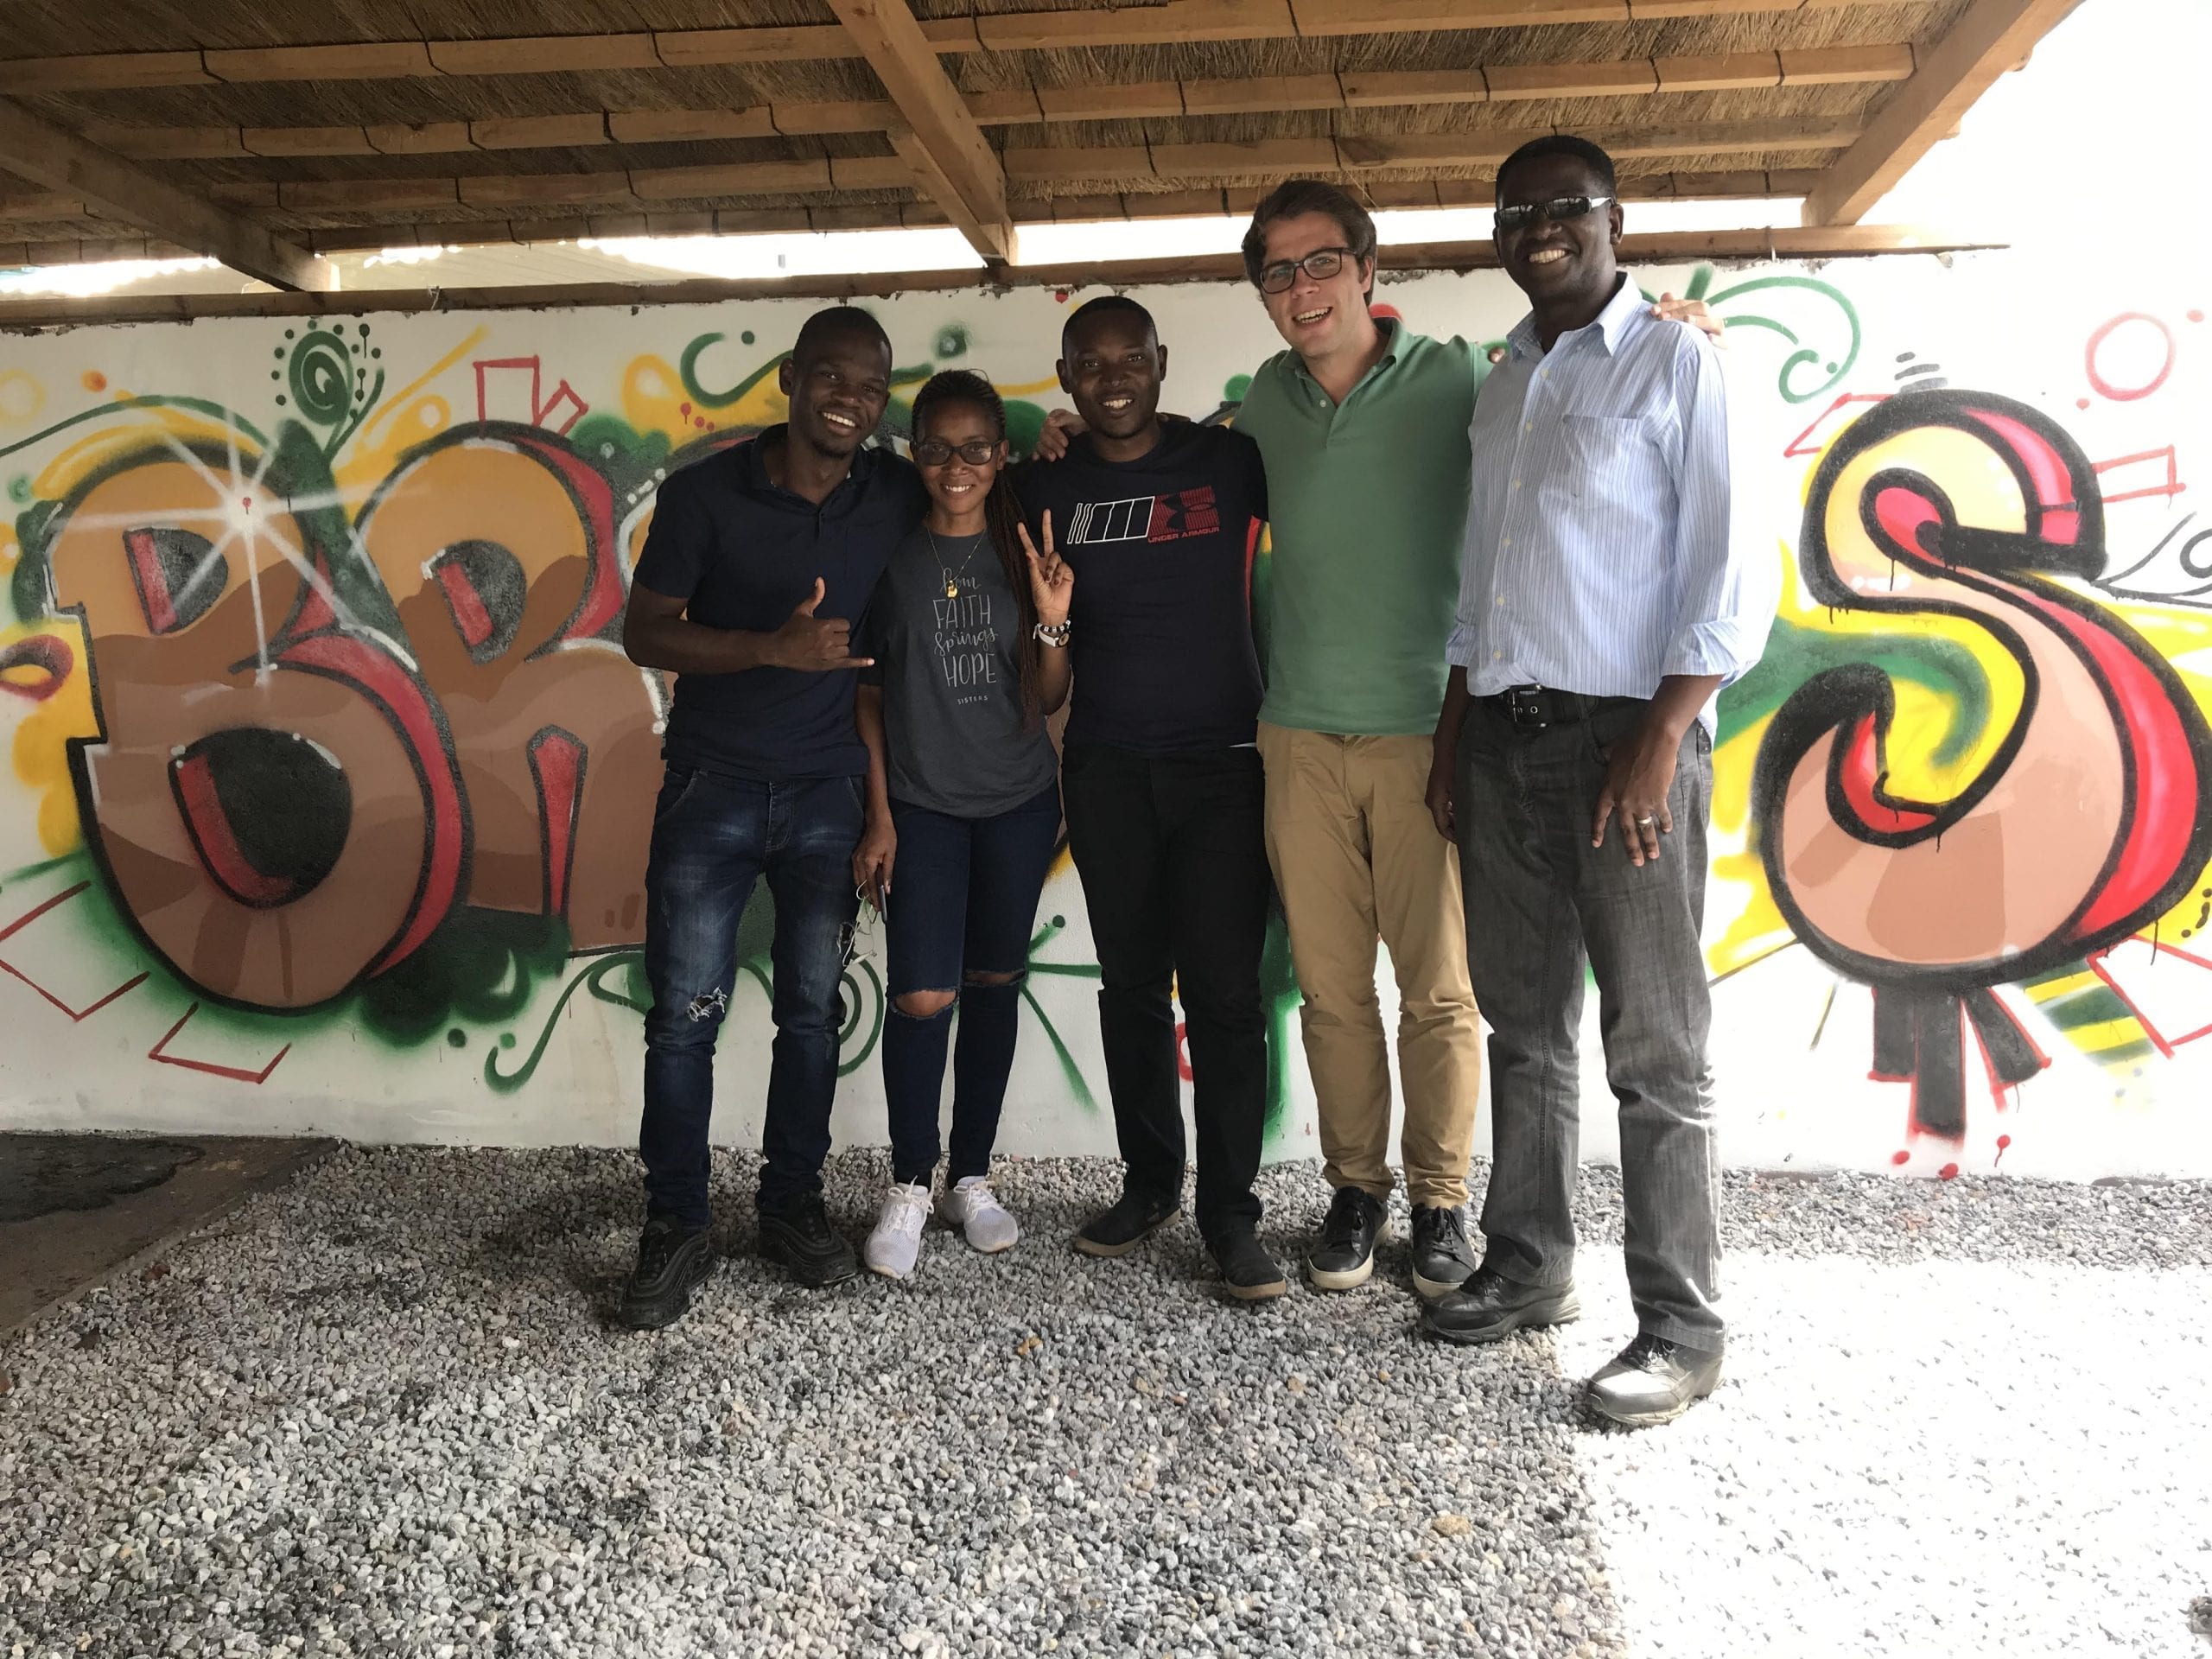 TechnoServe Fellow with team in Zambia working on food security and malnutrition initiatives